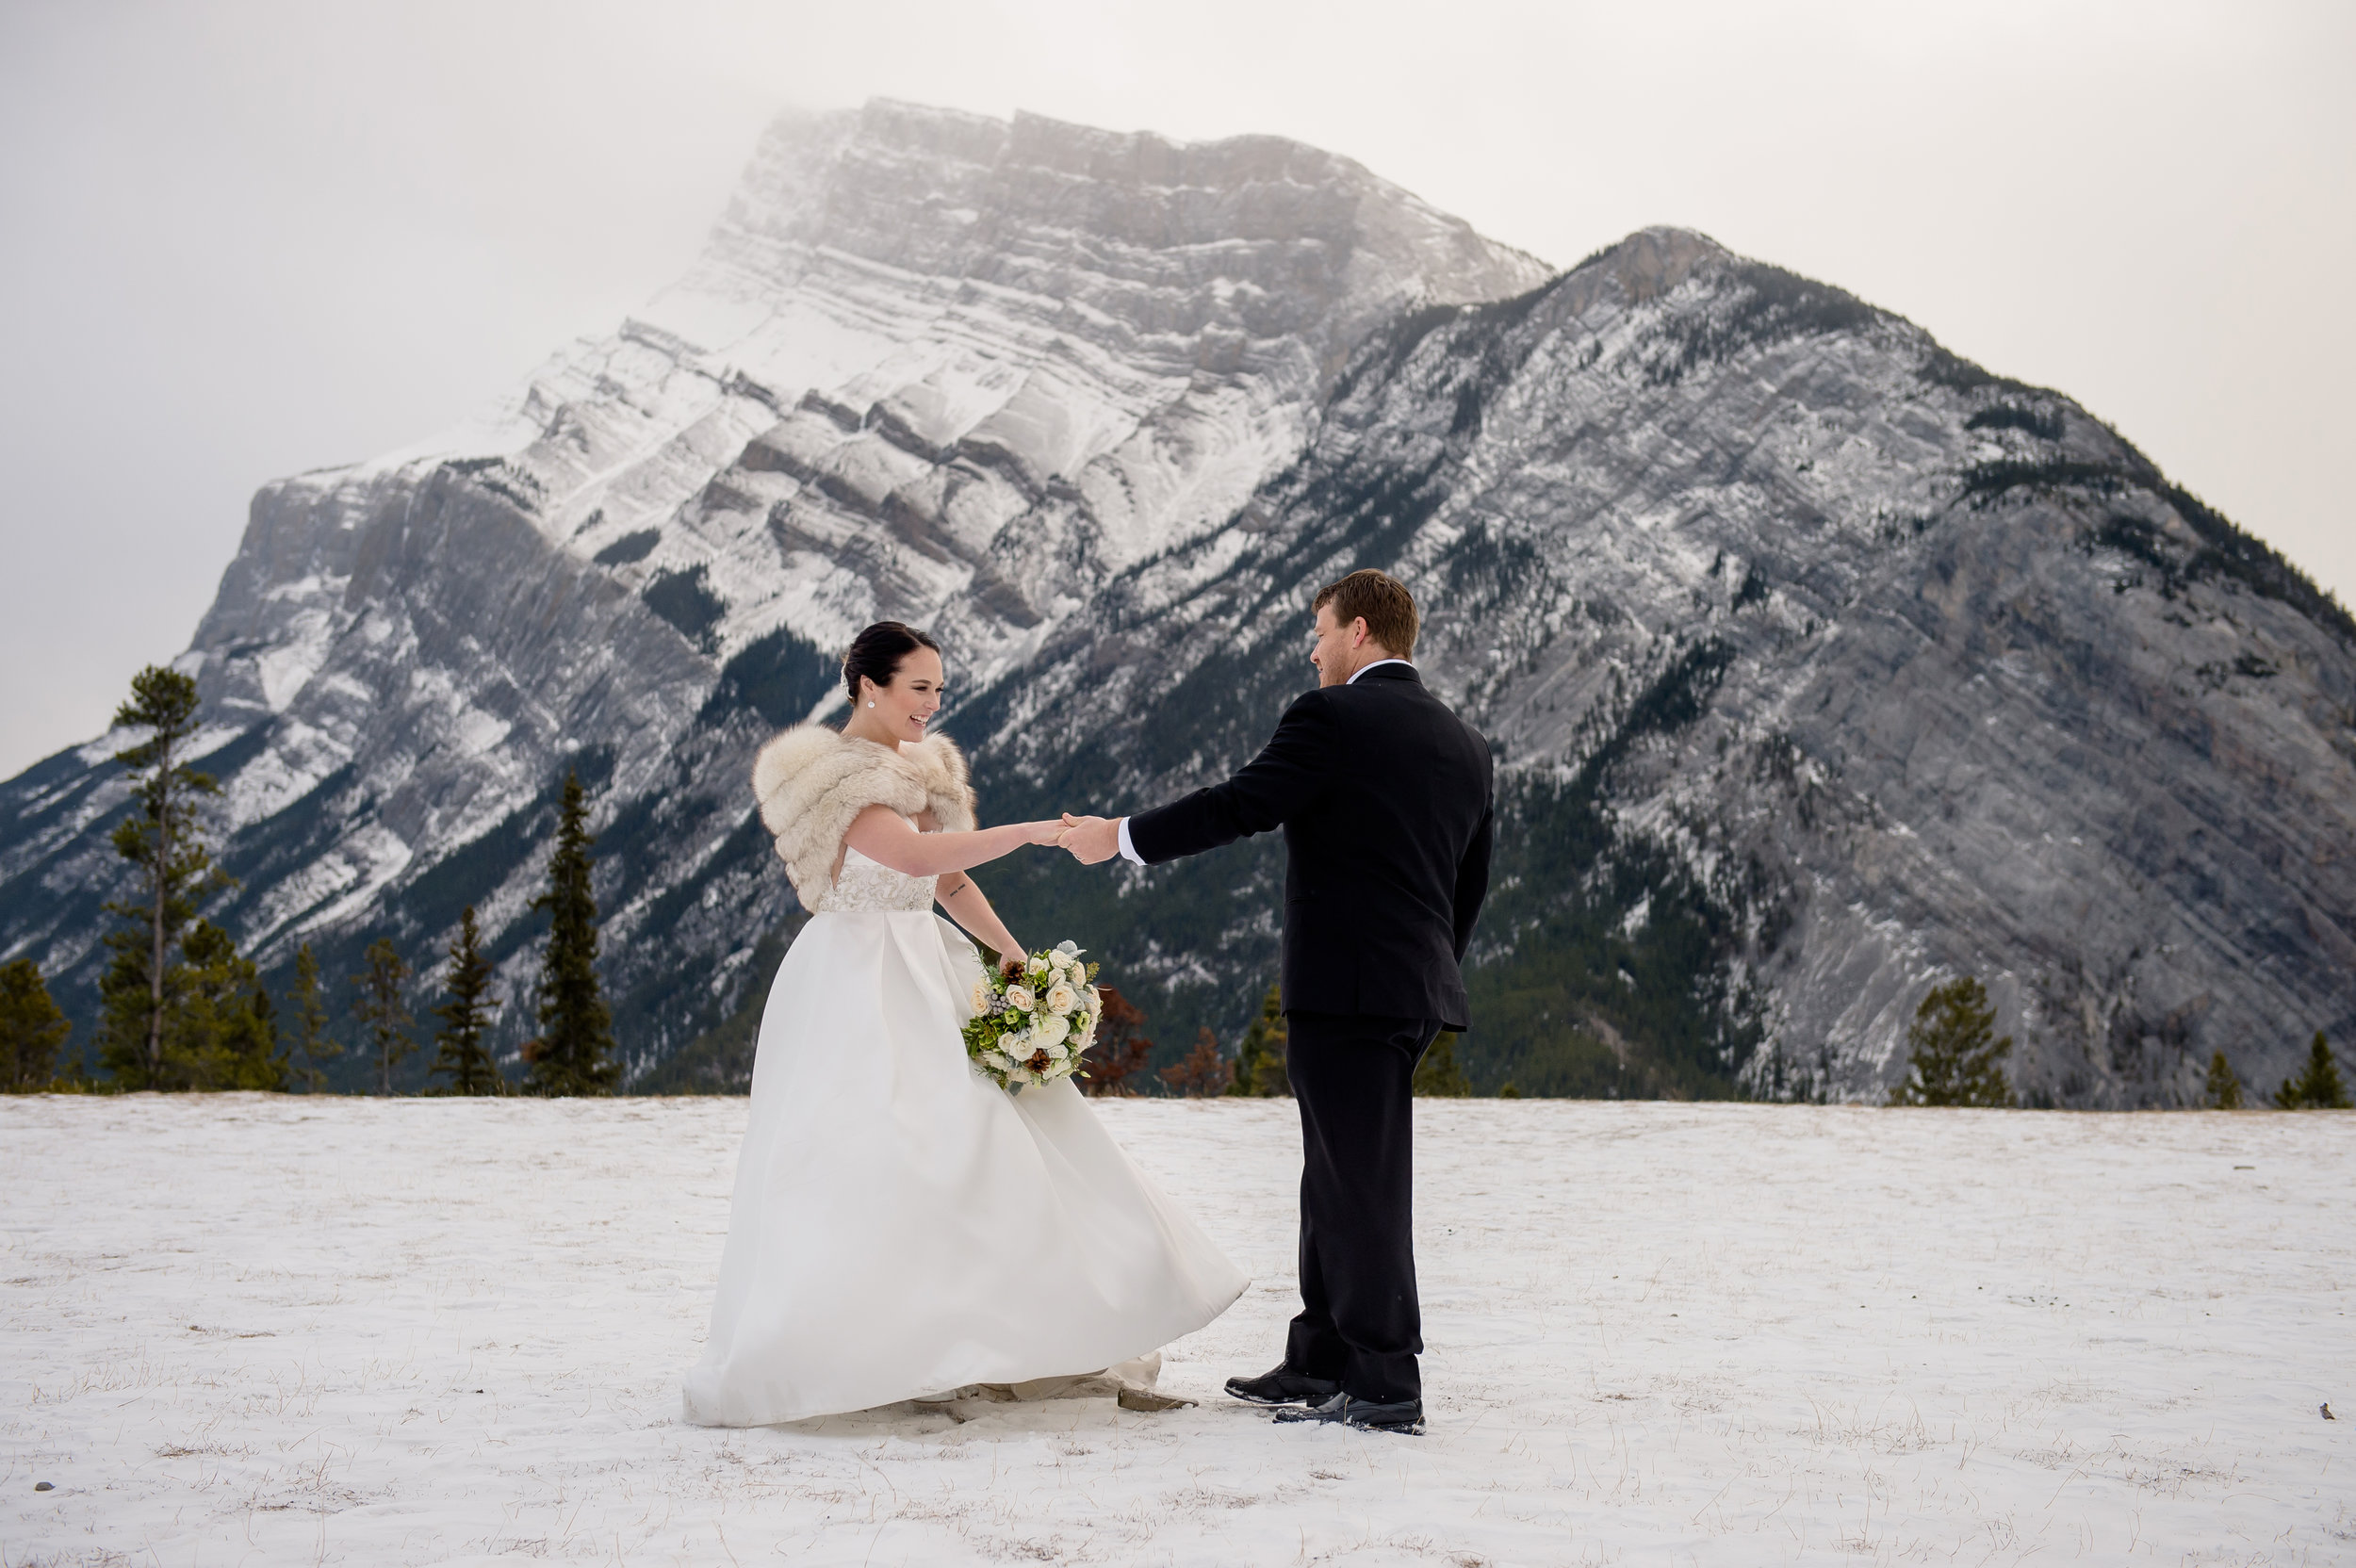  Winter wedding in Banff, Canada | Anne Barge Harlequin gown from Little White Dress in Denver, Colorado |&nbsp; Orange Girl Photography  